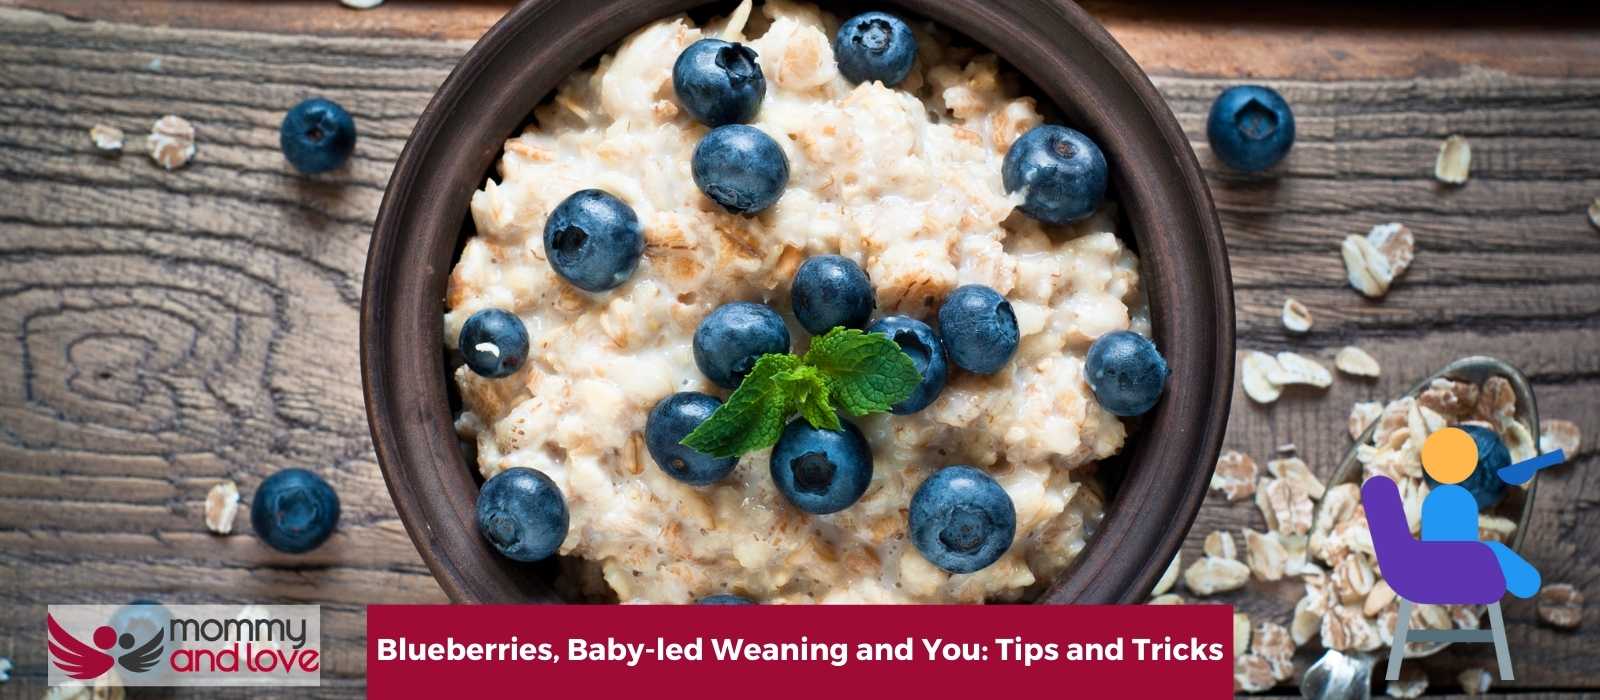 Blueberries, Baby-led Weaning and You Tips and Tricks